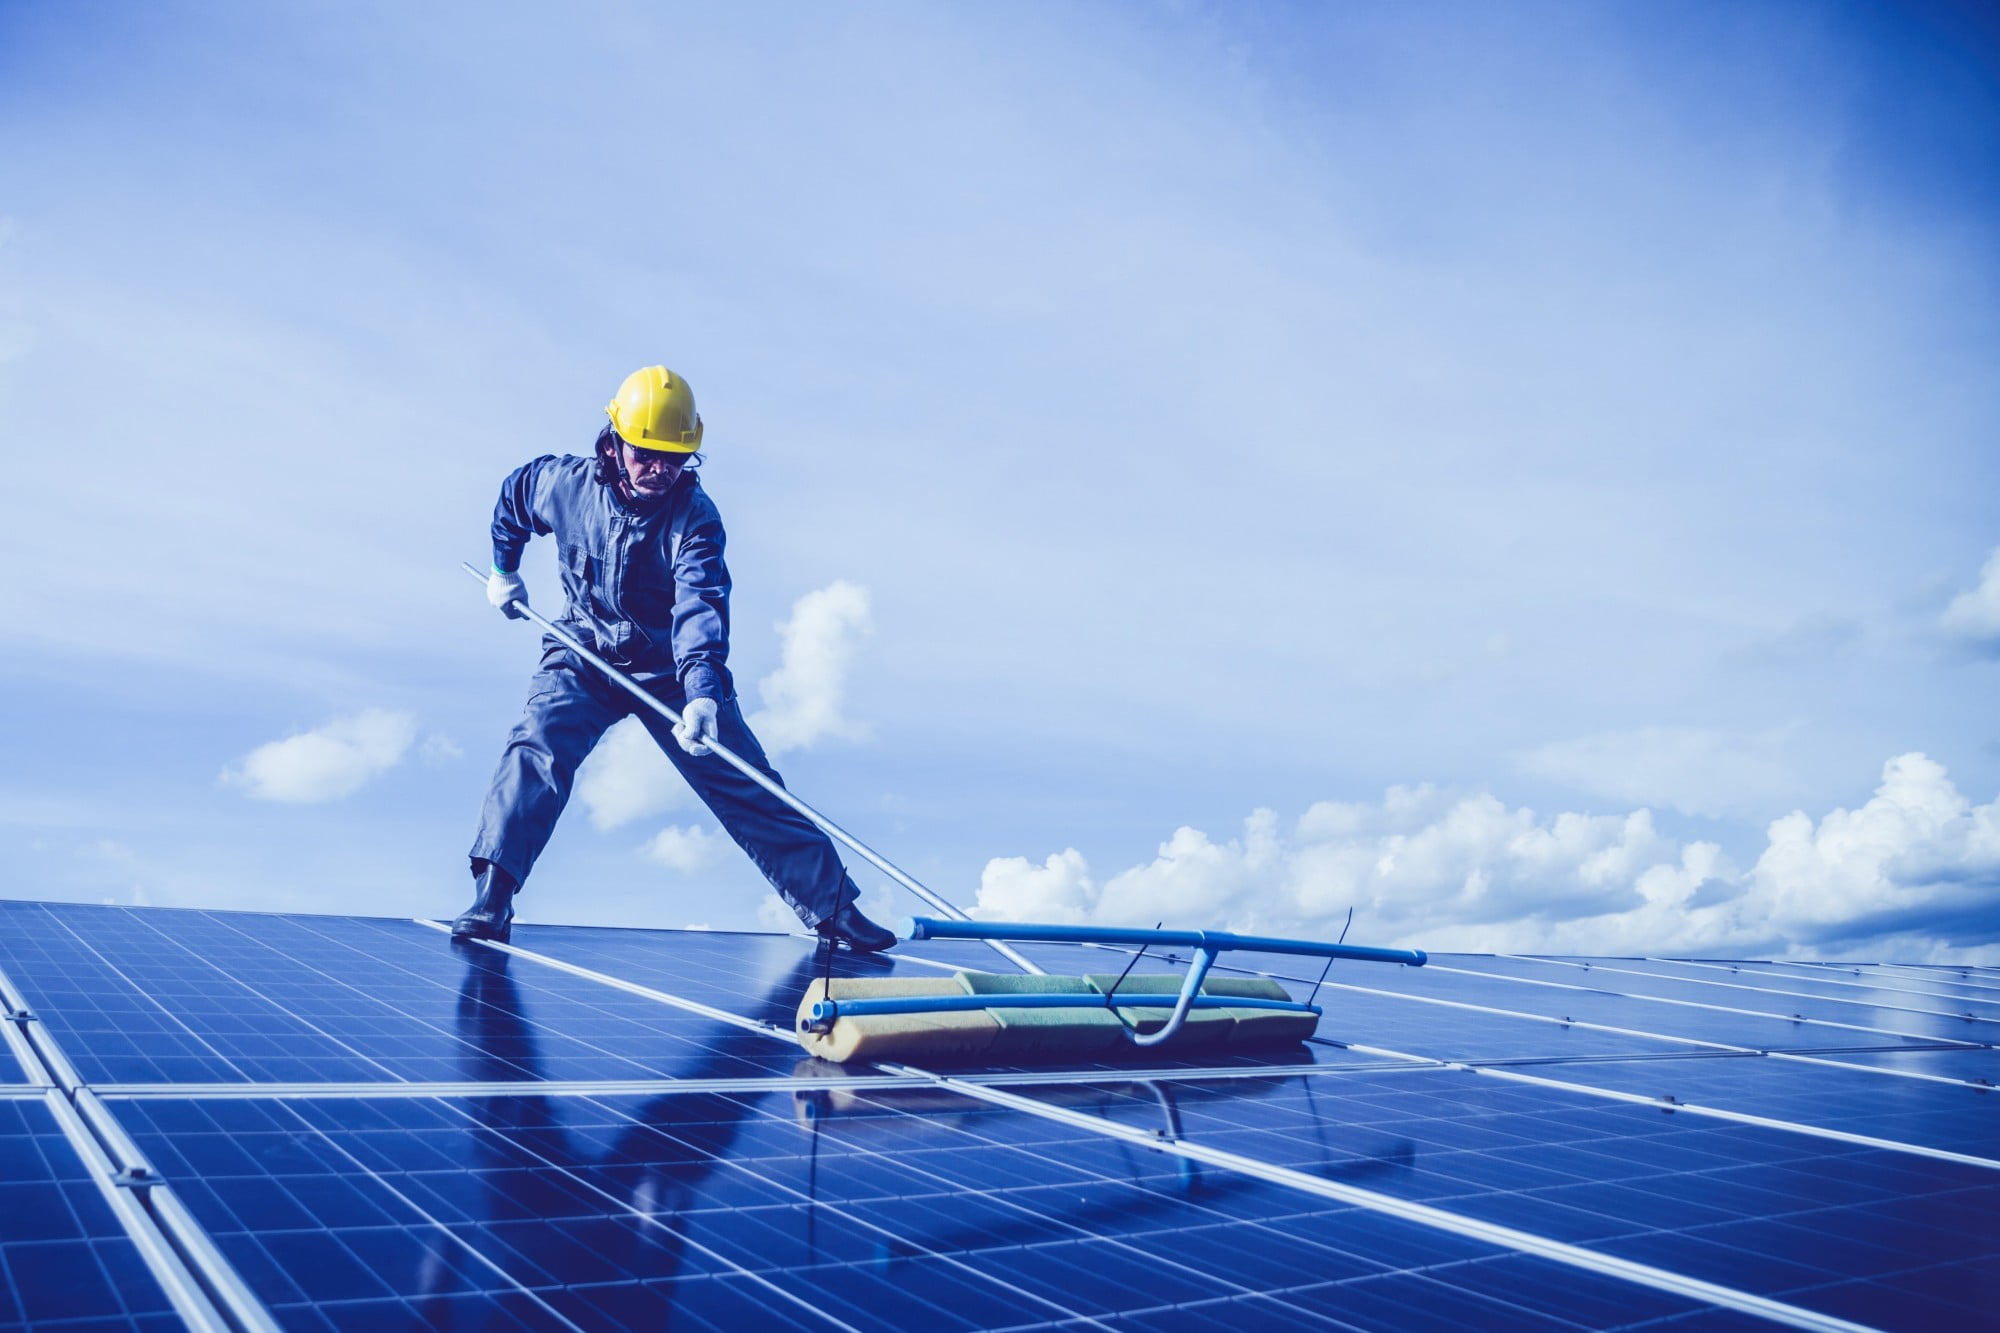 Keeping your home's solar panels in good condition involves knowing what not to do. Here are common errors in residential solar care and how to avoid them.